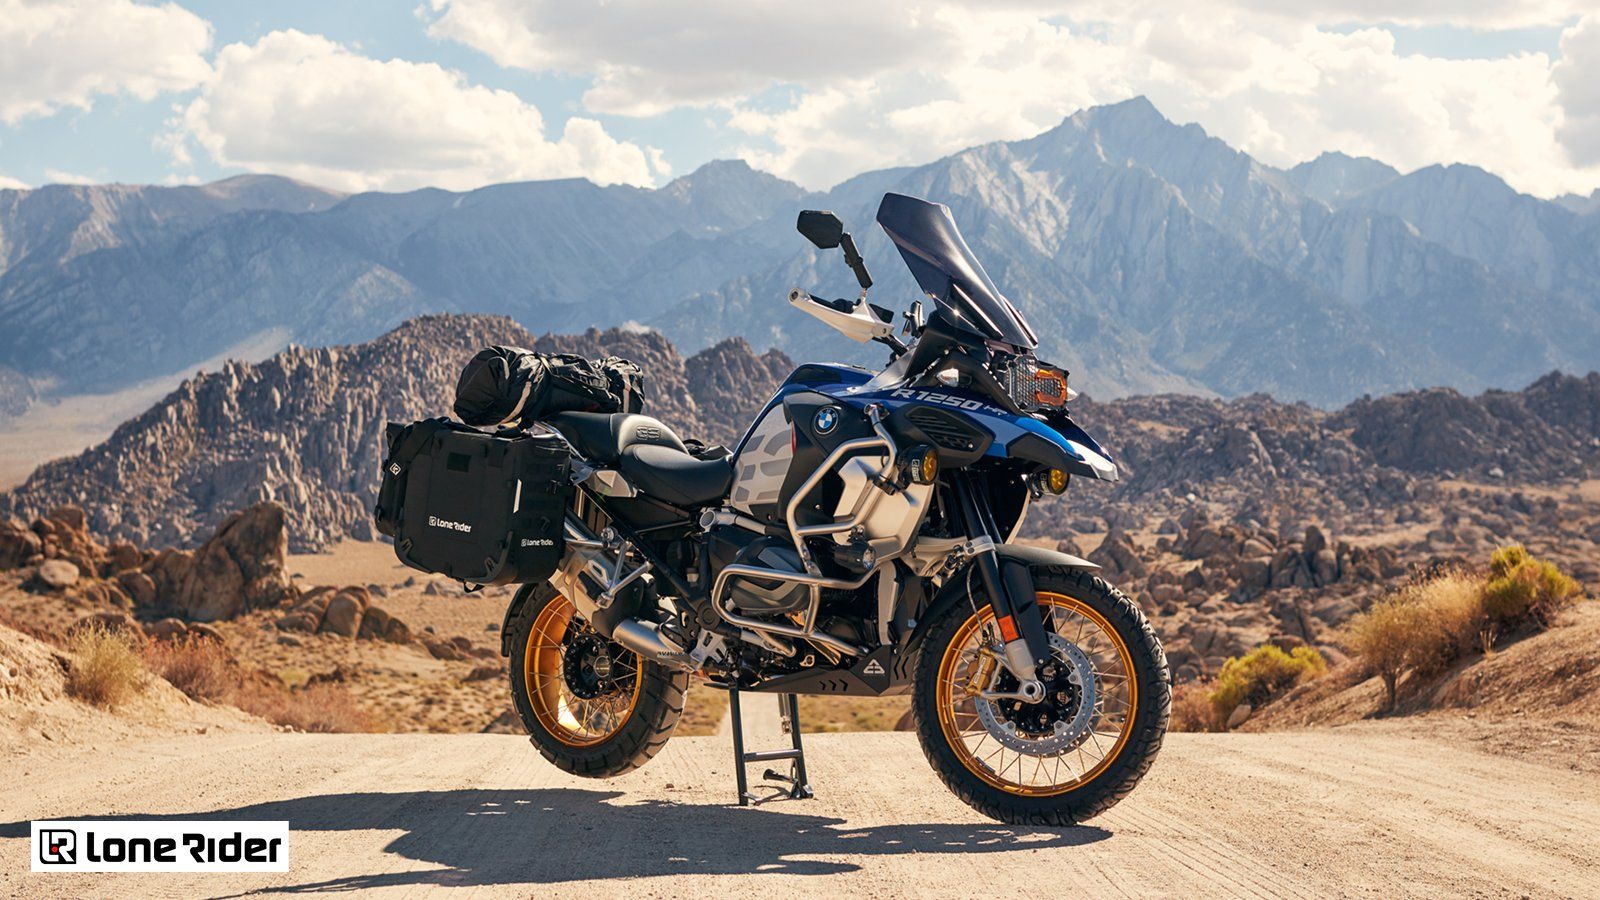 Win an Outfitted BMW R 1250 GS Adventure Motorcycle and $000